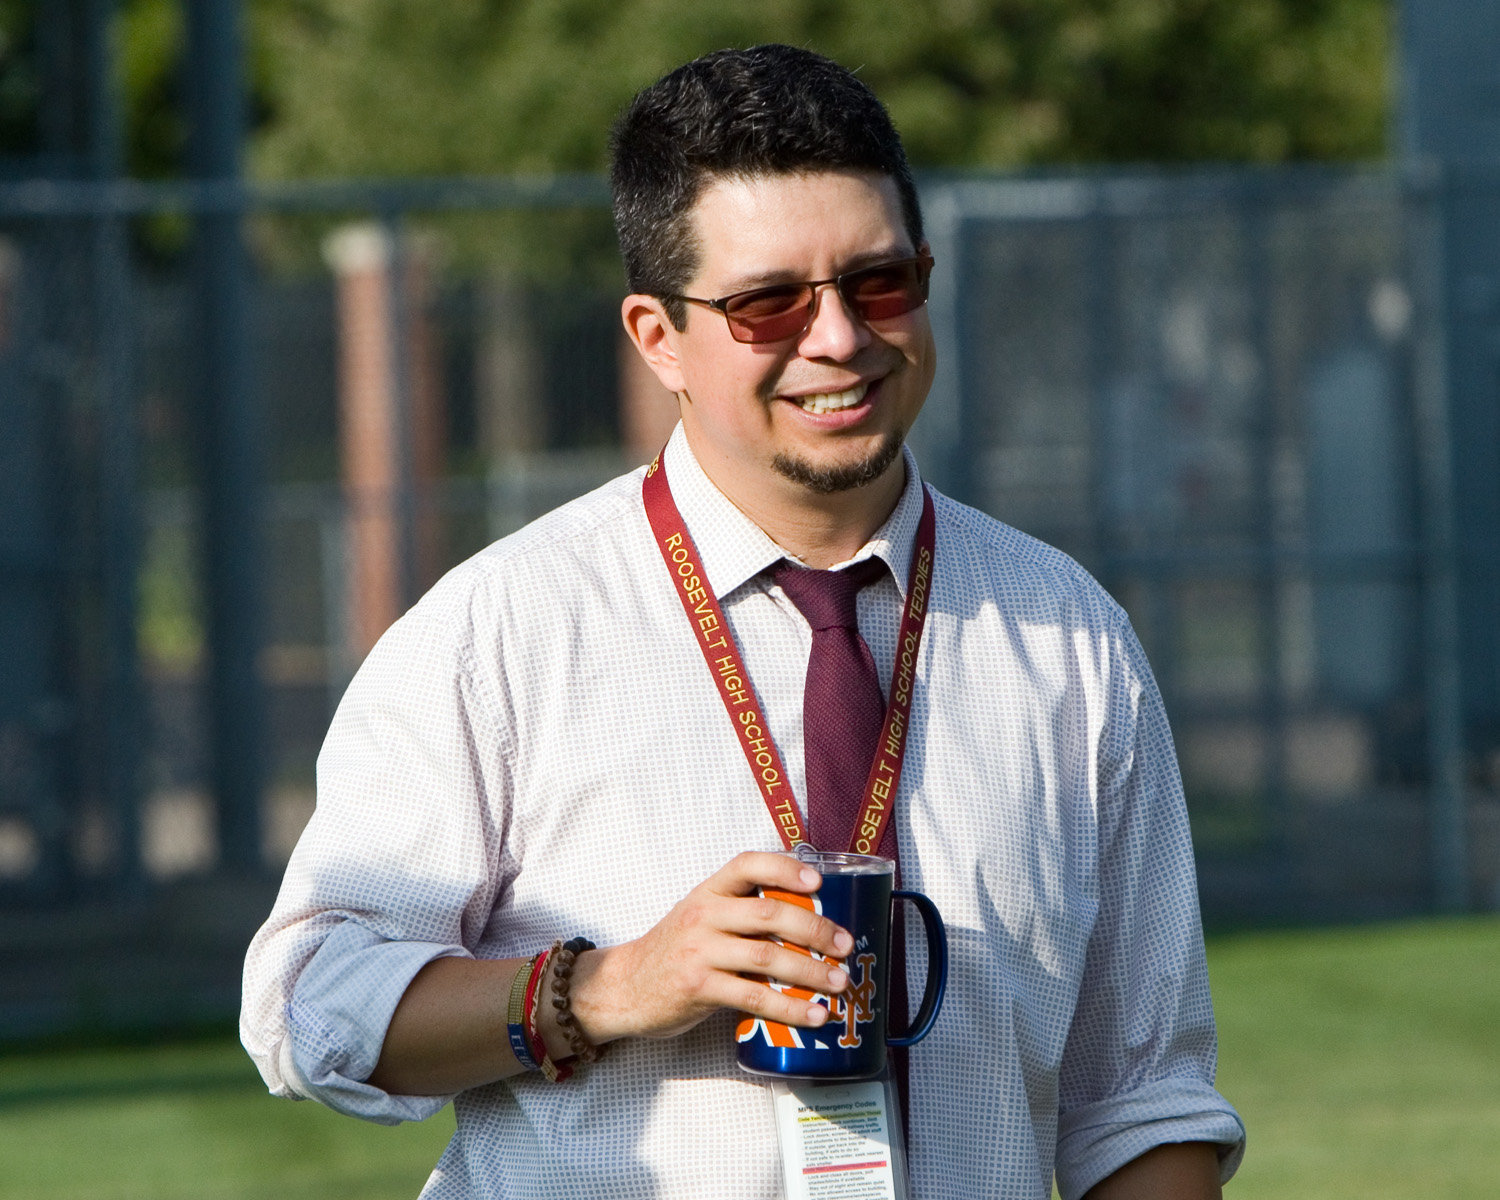 Principal Christian Ledesma said, “We’ll be creating the welcoming environment we stake our vision on. I come from an academic coaching background in literacy. I believe that we can always do better. There’s always room for improvement.” (Photo by Margie O’Loughlin)